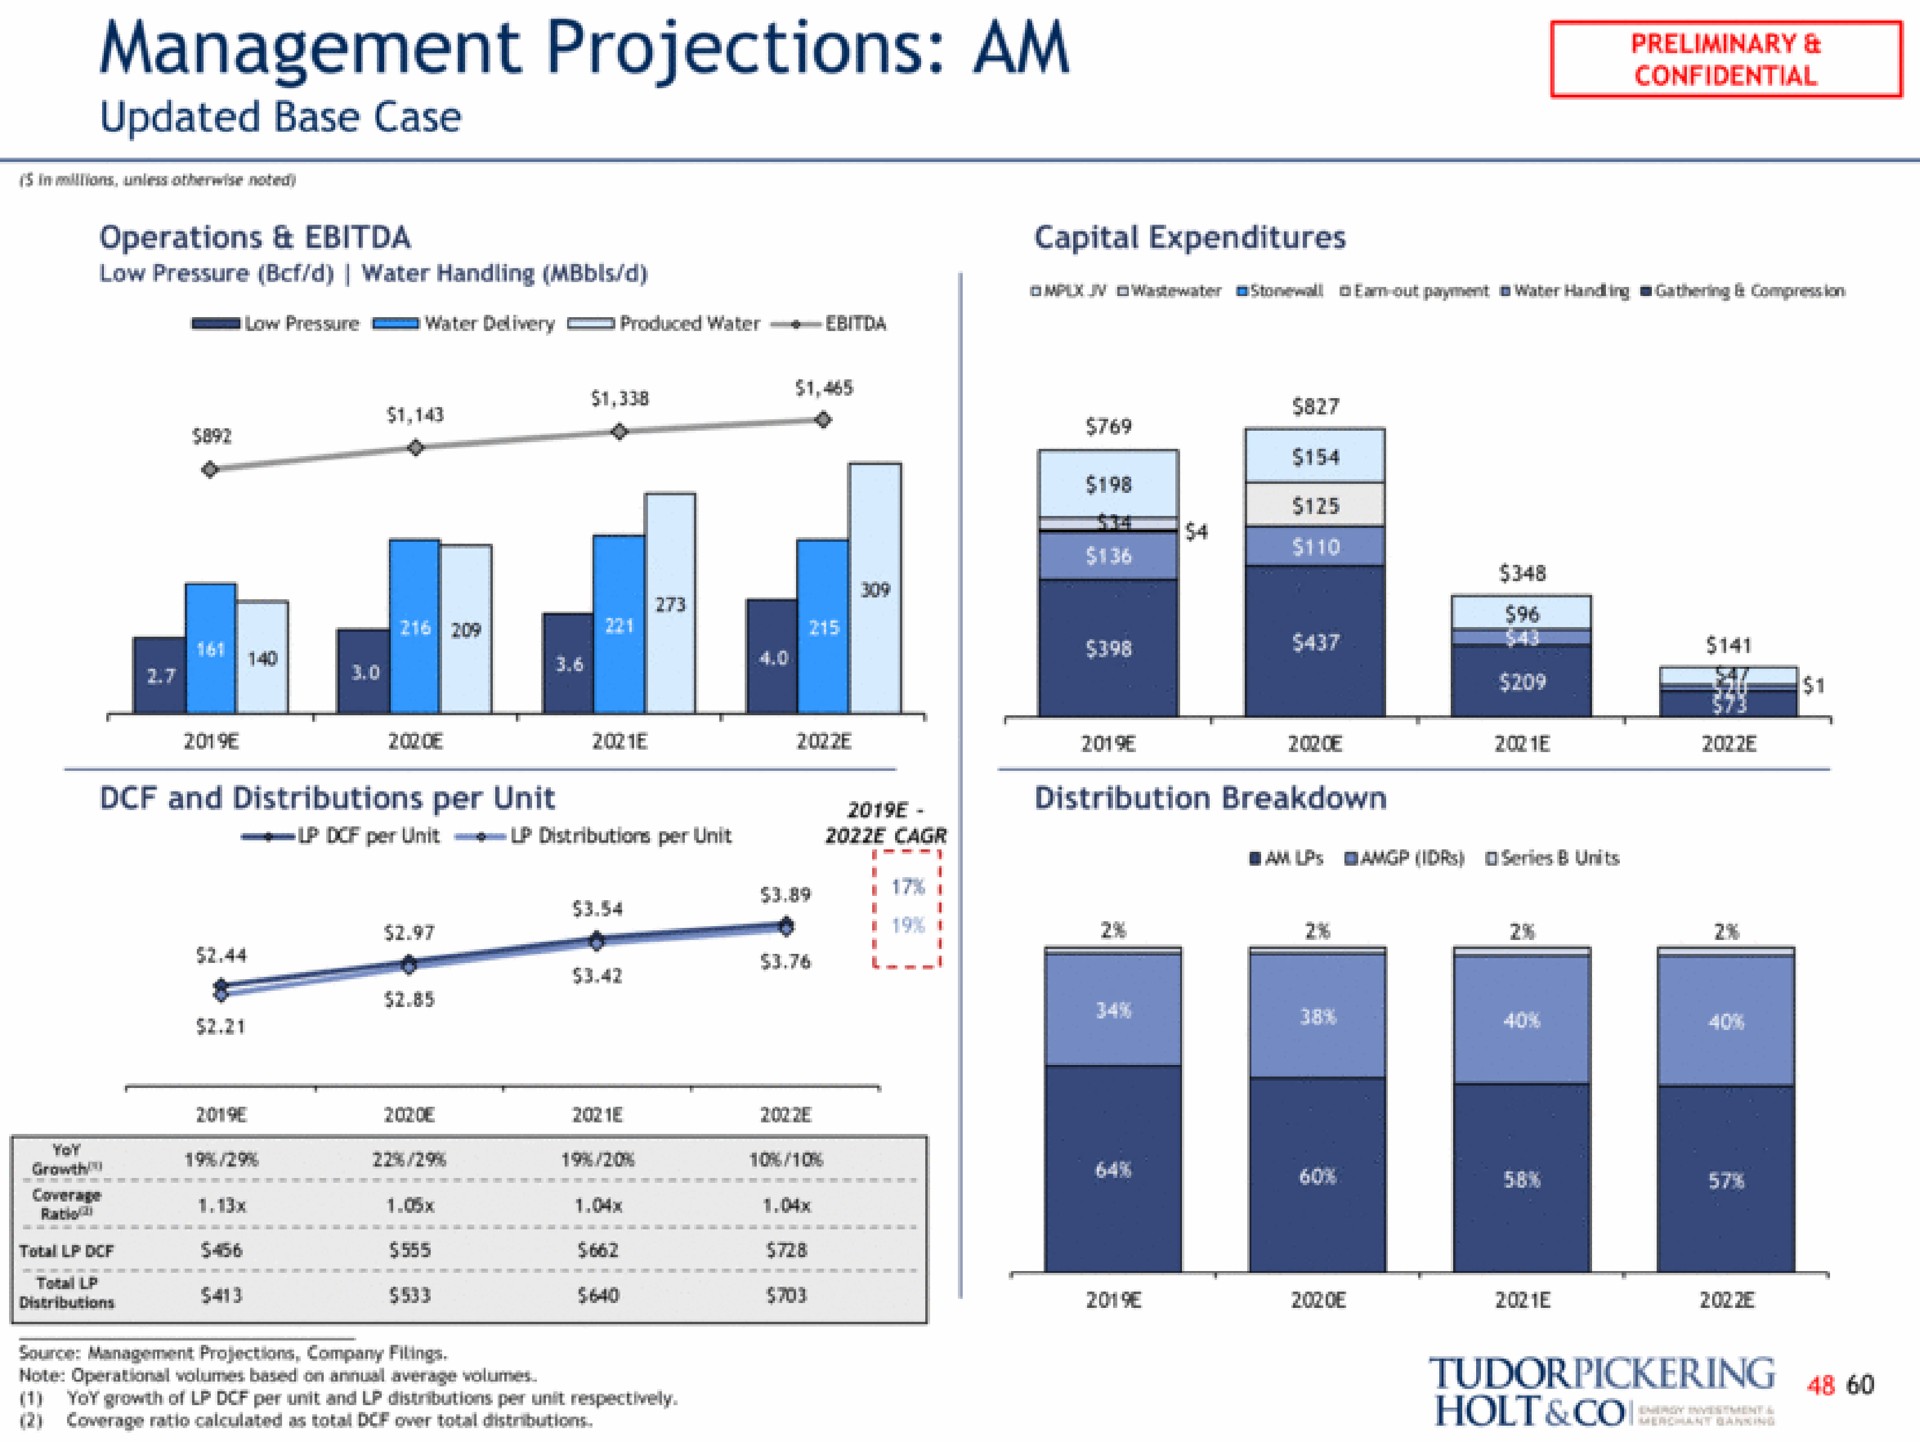 management projections am updated base case snap | Tudor, Pickering, Holt & Co